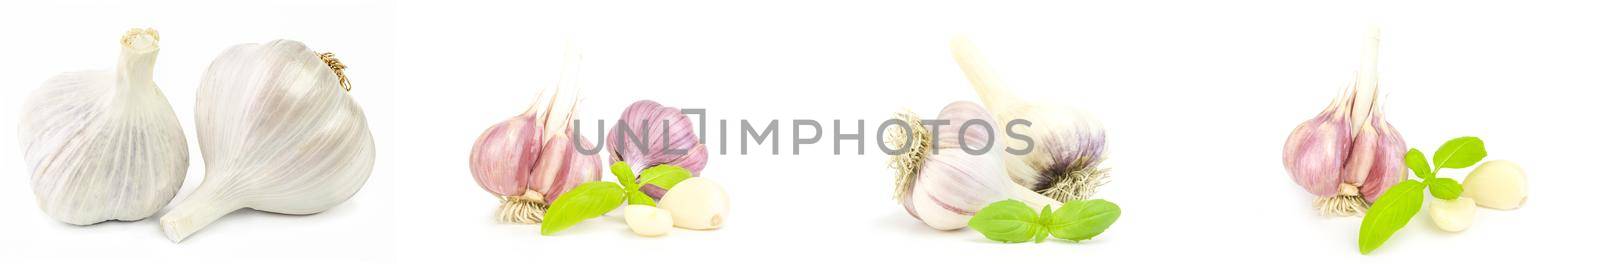 Collage of Garlic isolated on a white background cutout